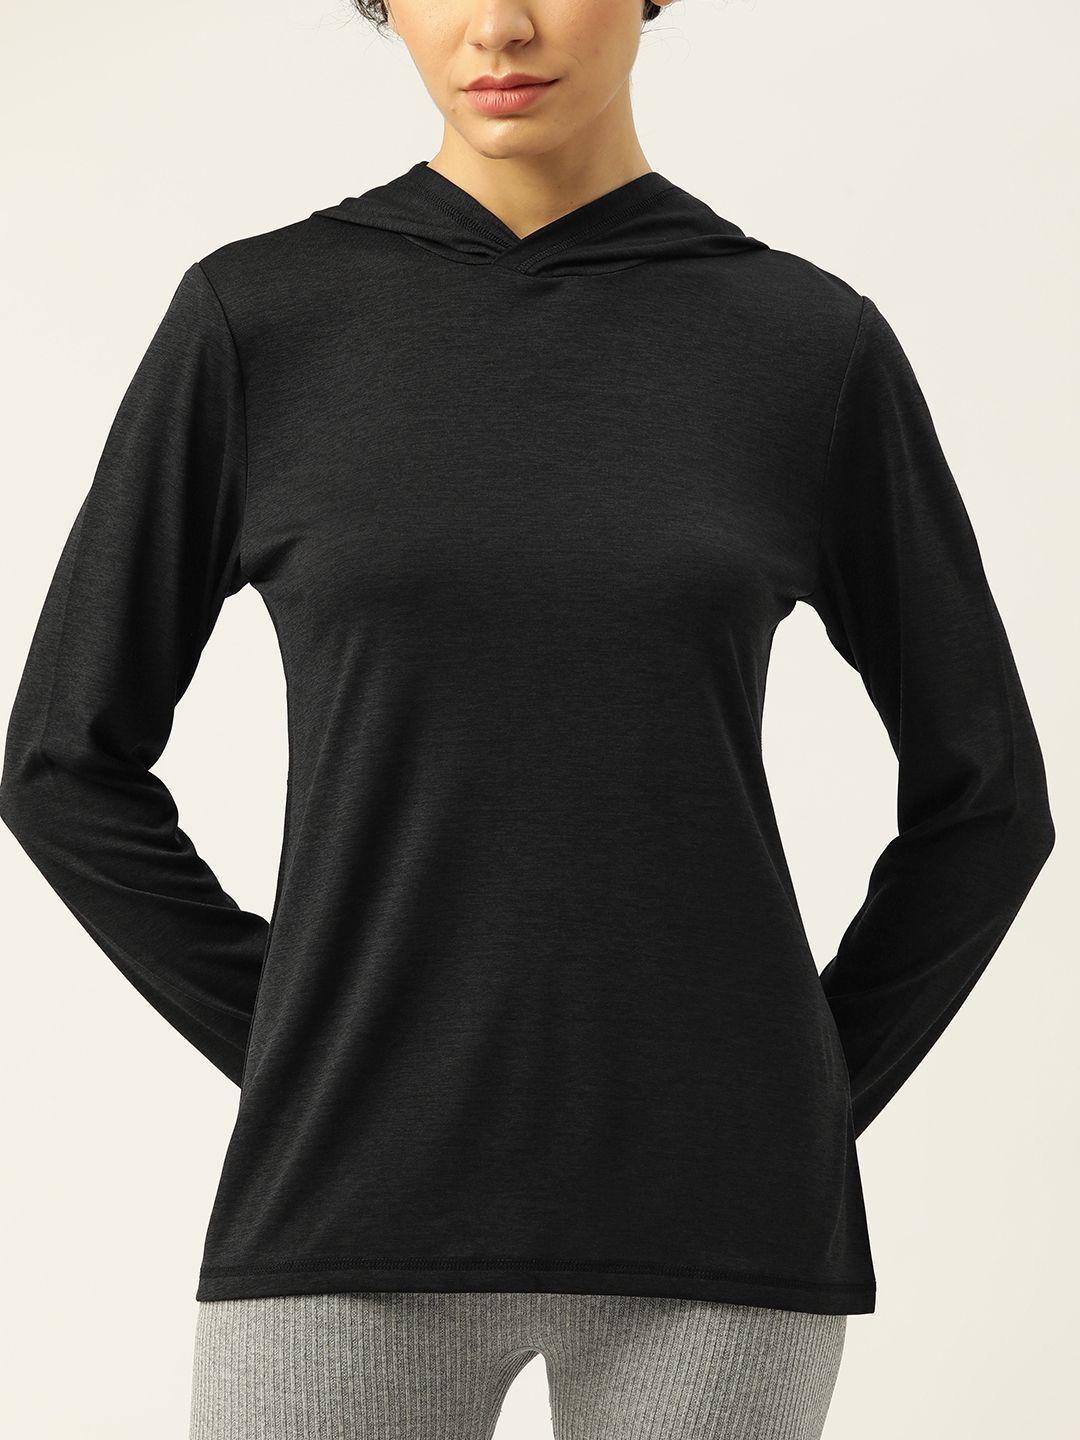 macy's ideology black hooded knitted top